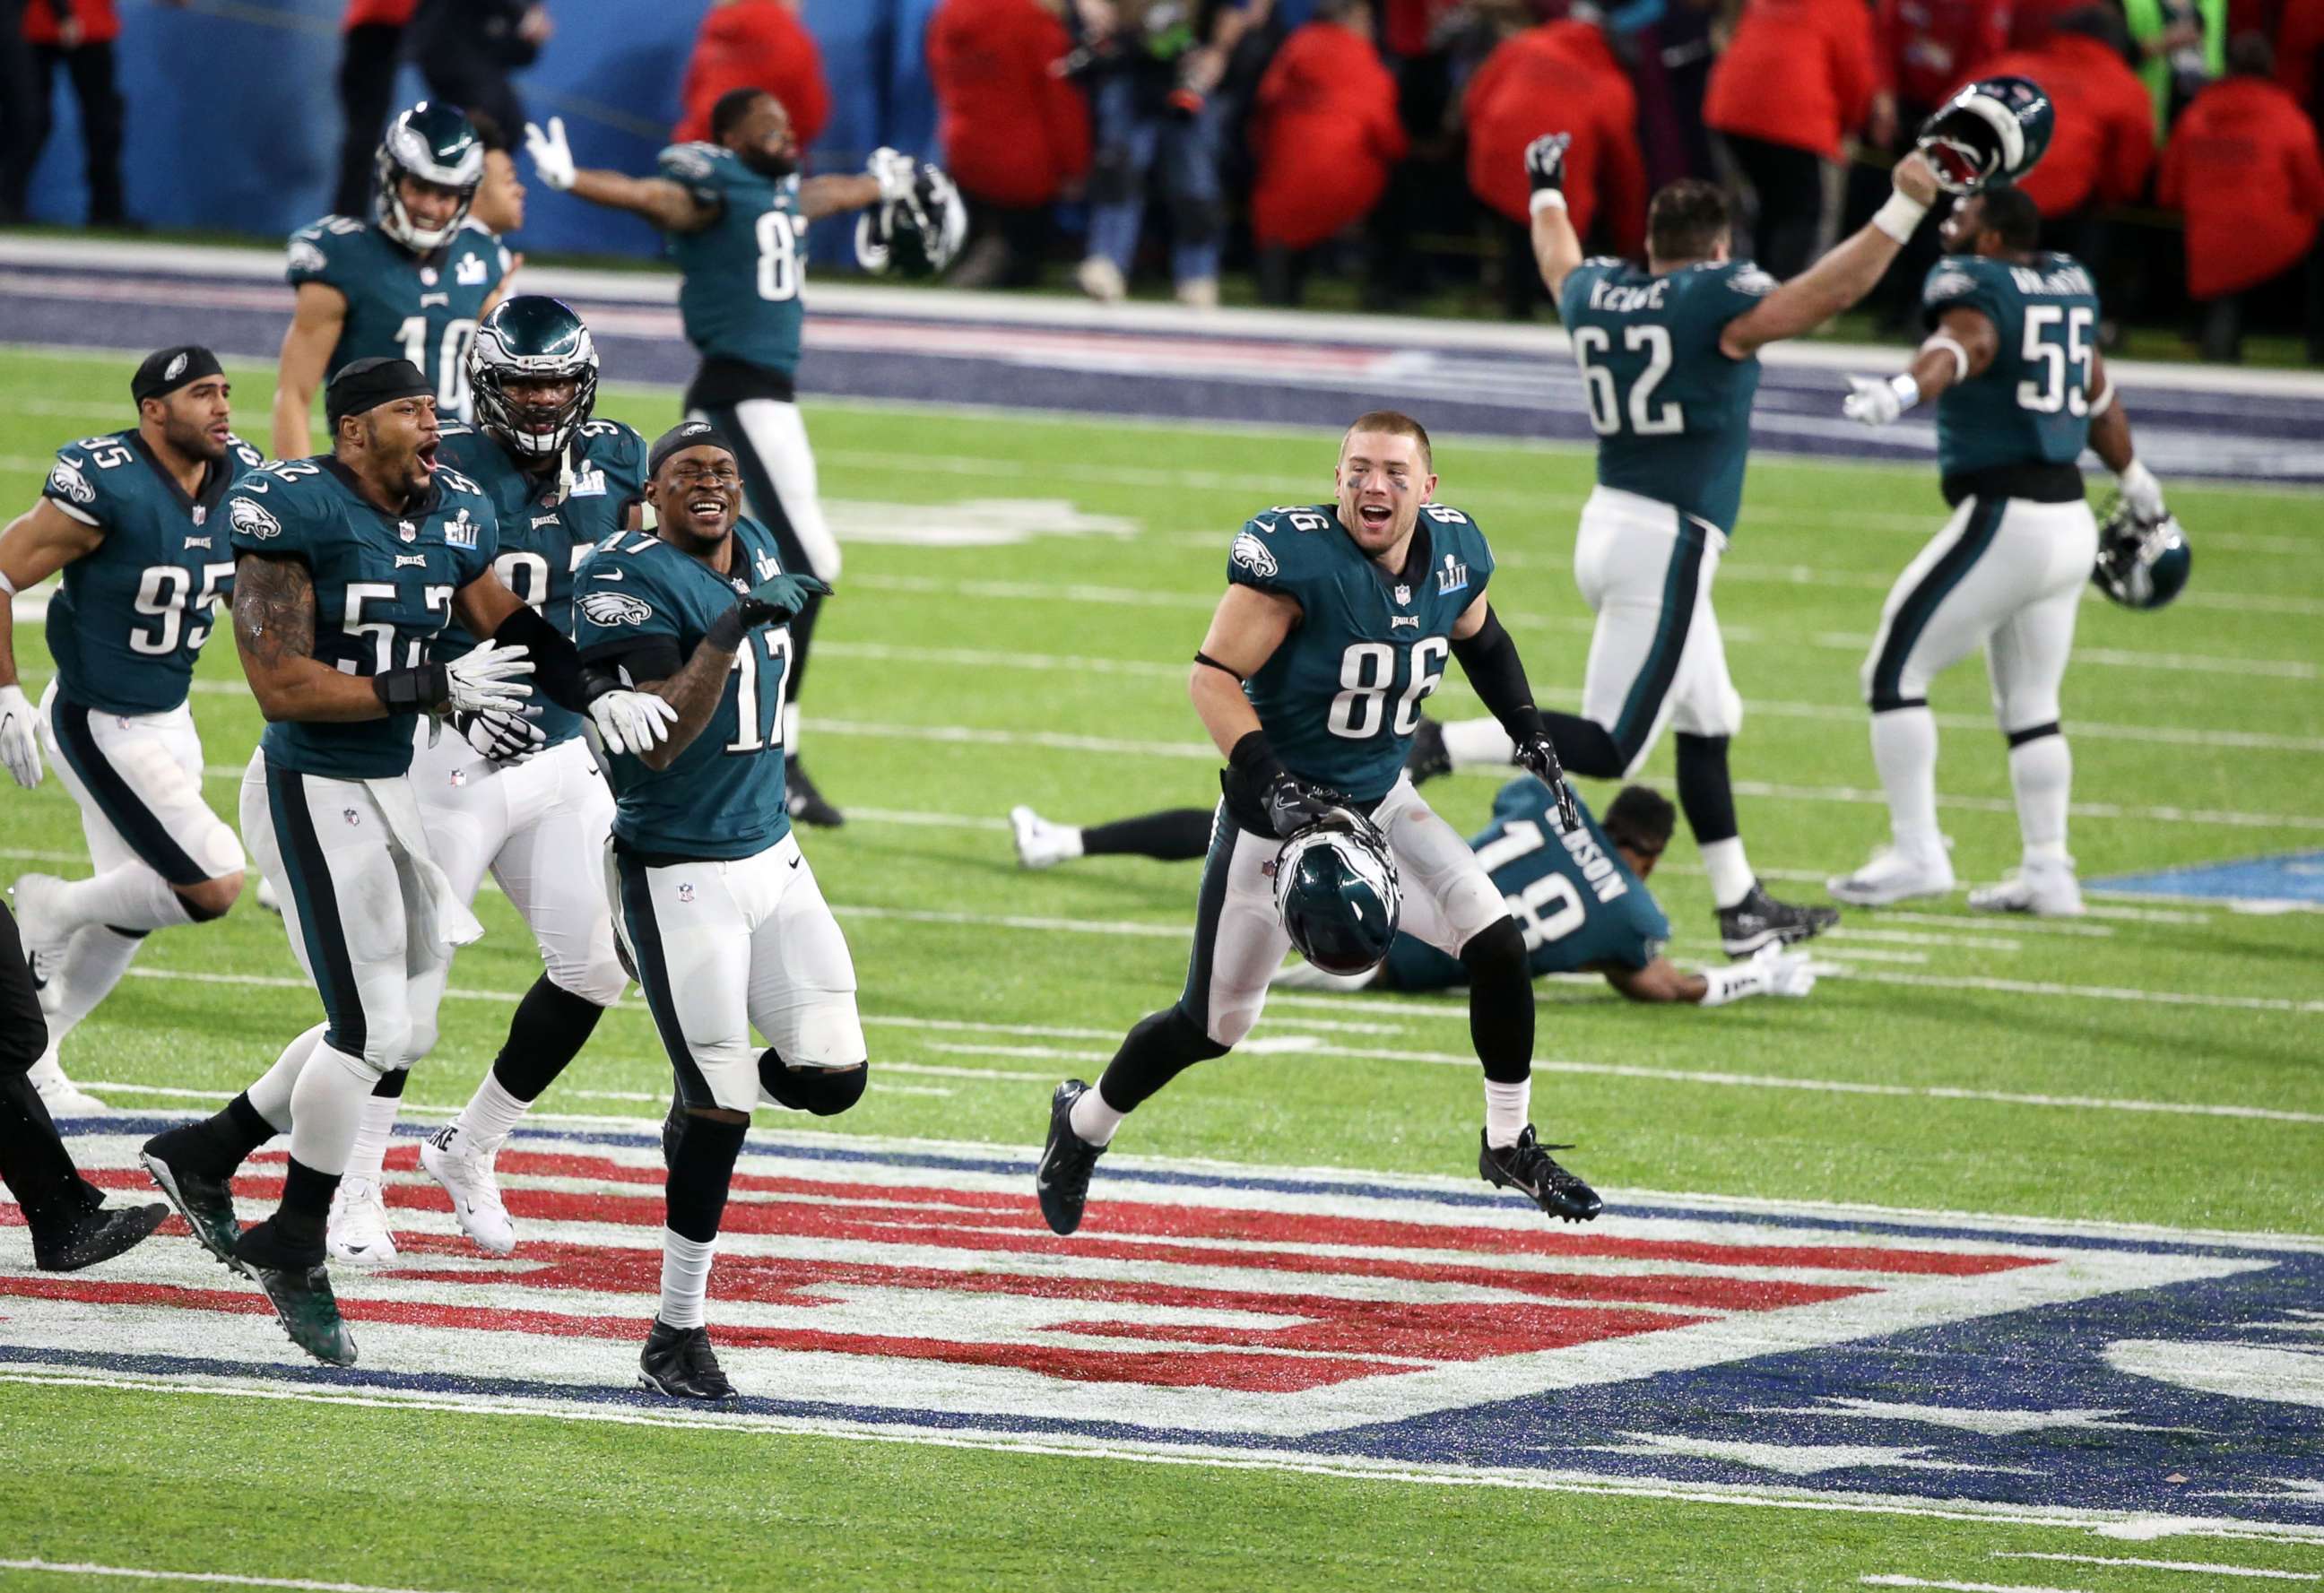 PHOTO: The Philadelphia Eagles celebrate after defeating the New England Patriots in Super Bowl LII at U.S. Bank Stadium on Feb 4, 2018 in Minneapolis.